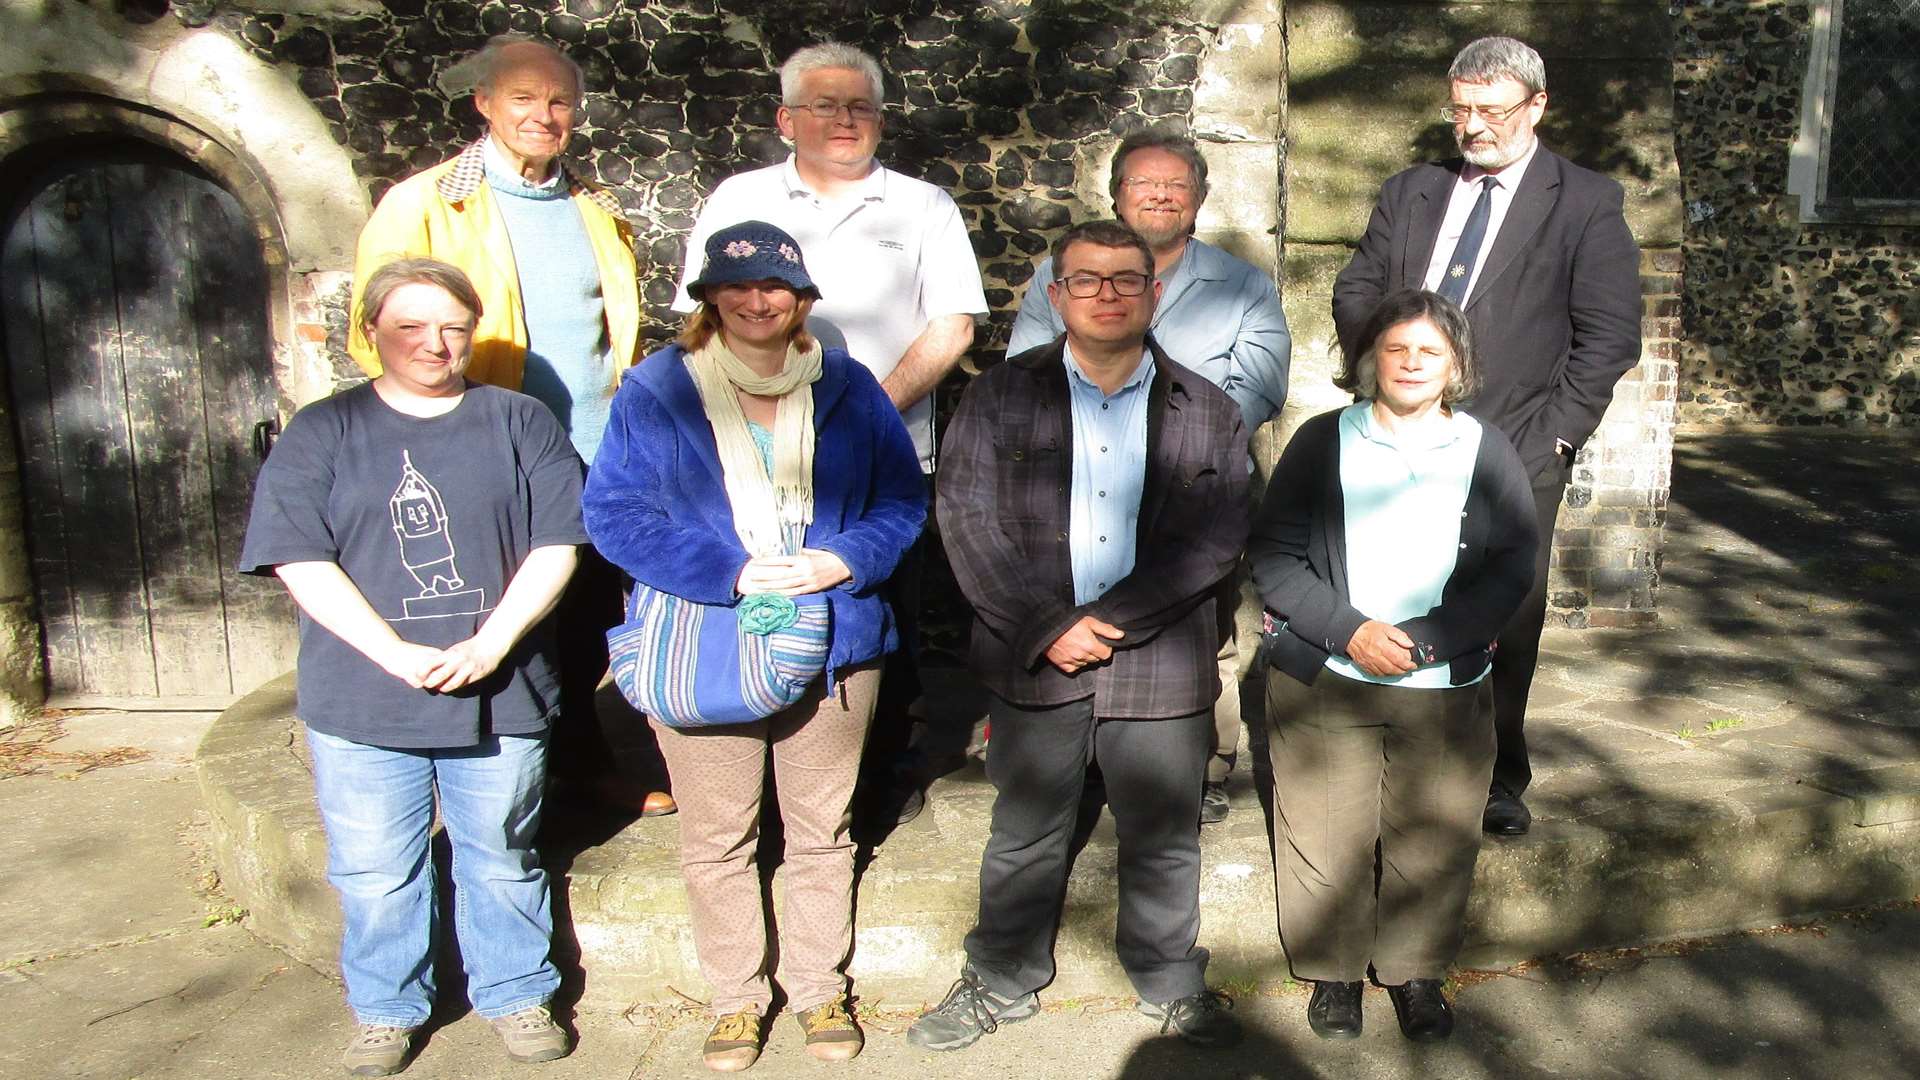 The bell ringers (back row from left to right): Peter Hartley, Alex Britton, Terry Barnard, Alan Pink; (front row from left to right): Helen Webb, Anita Perryman, Nick Wheeler, Louise Pink